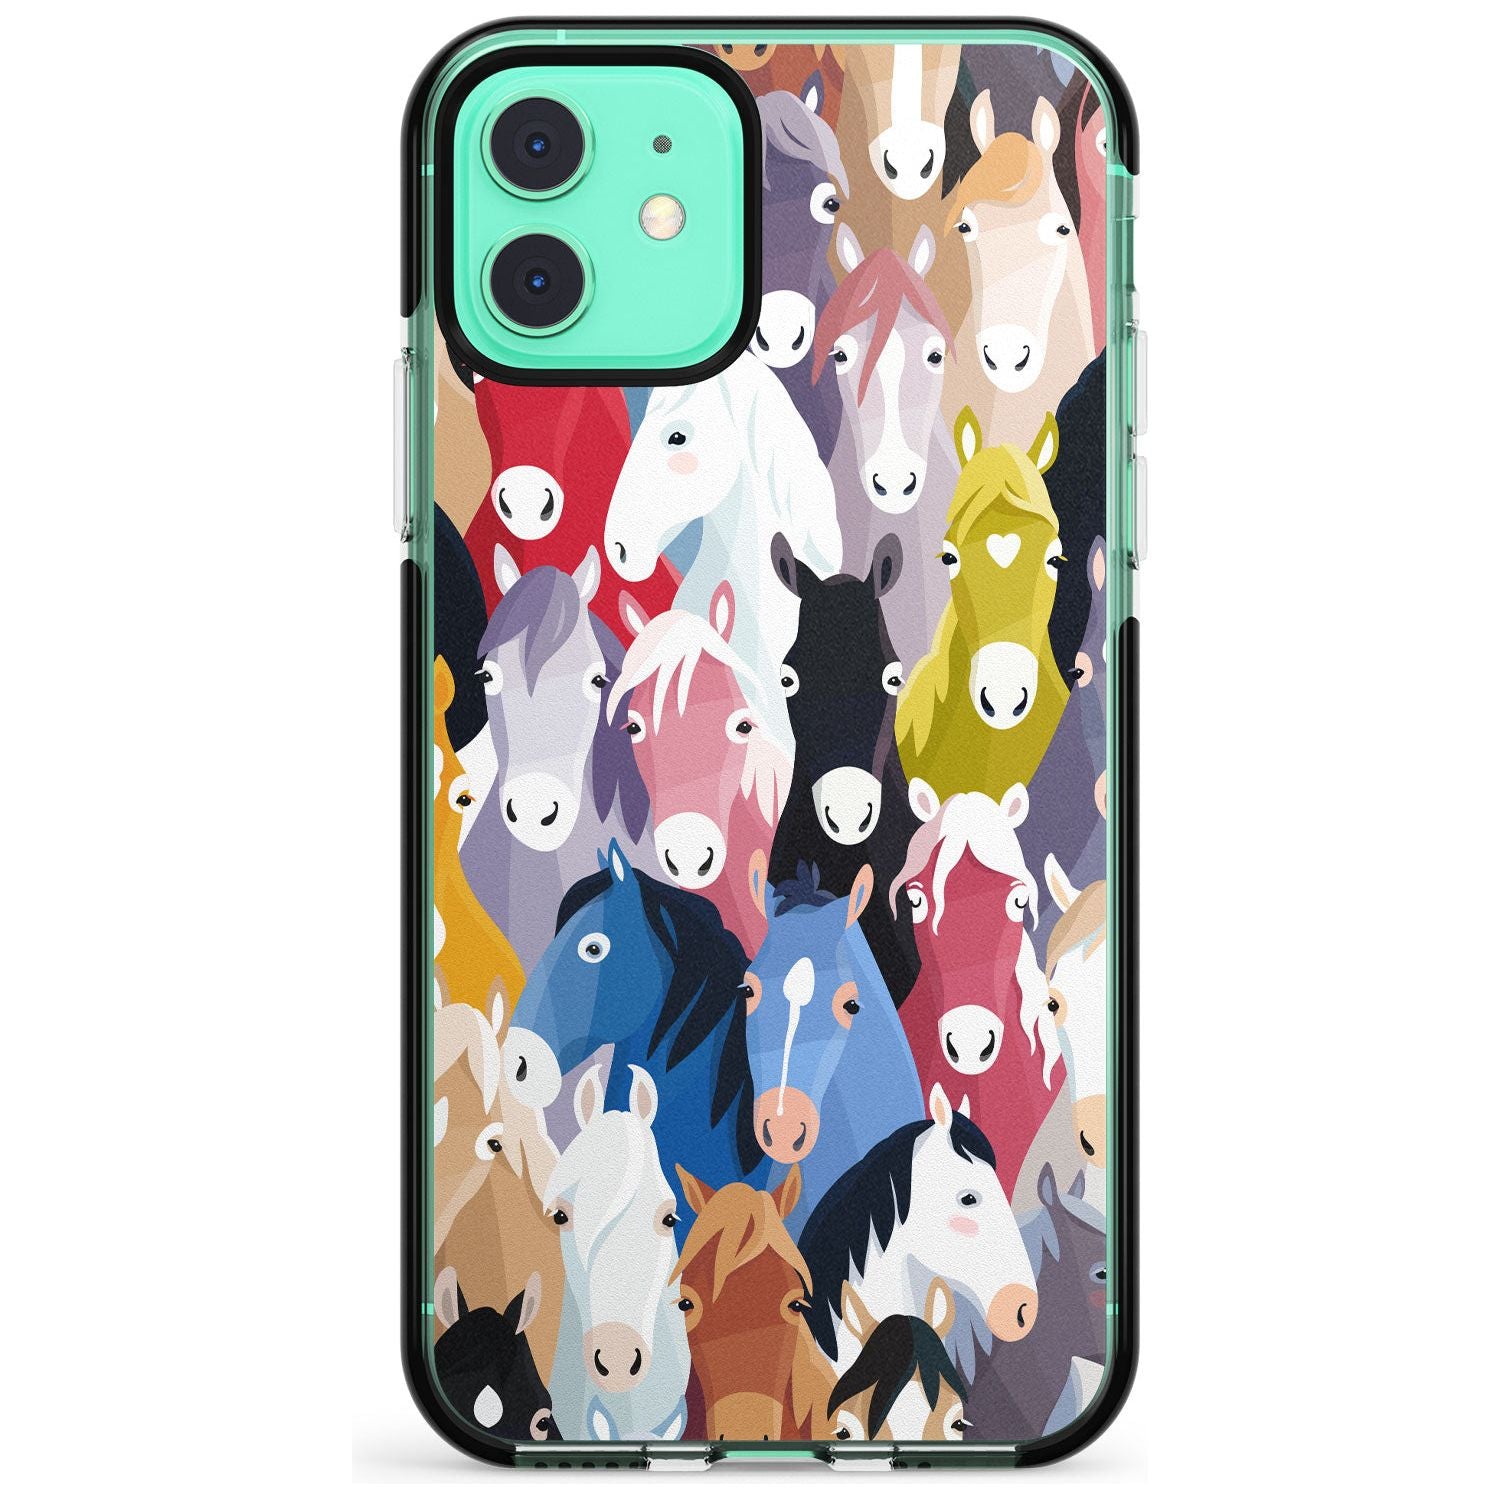 Colourful Horse Pattern Black Impact Phone Case for iPhone 11 Pro Max